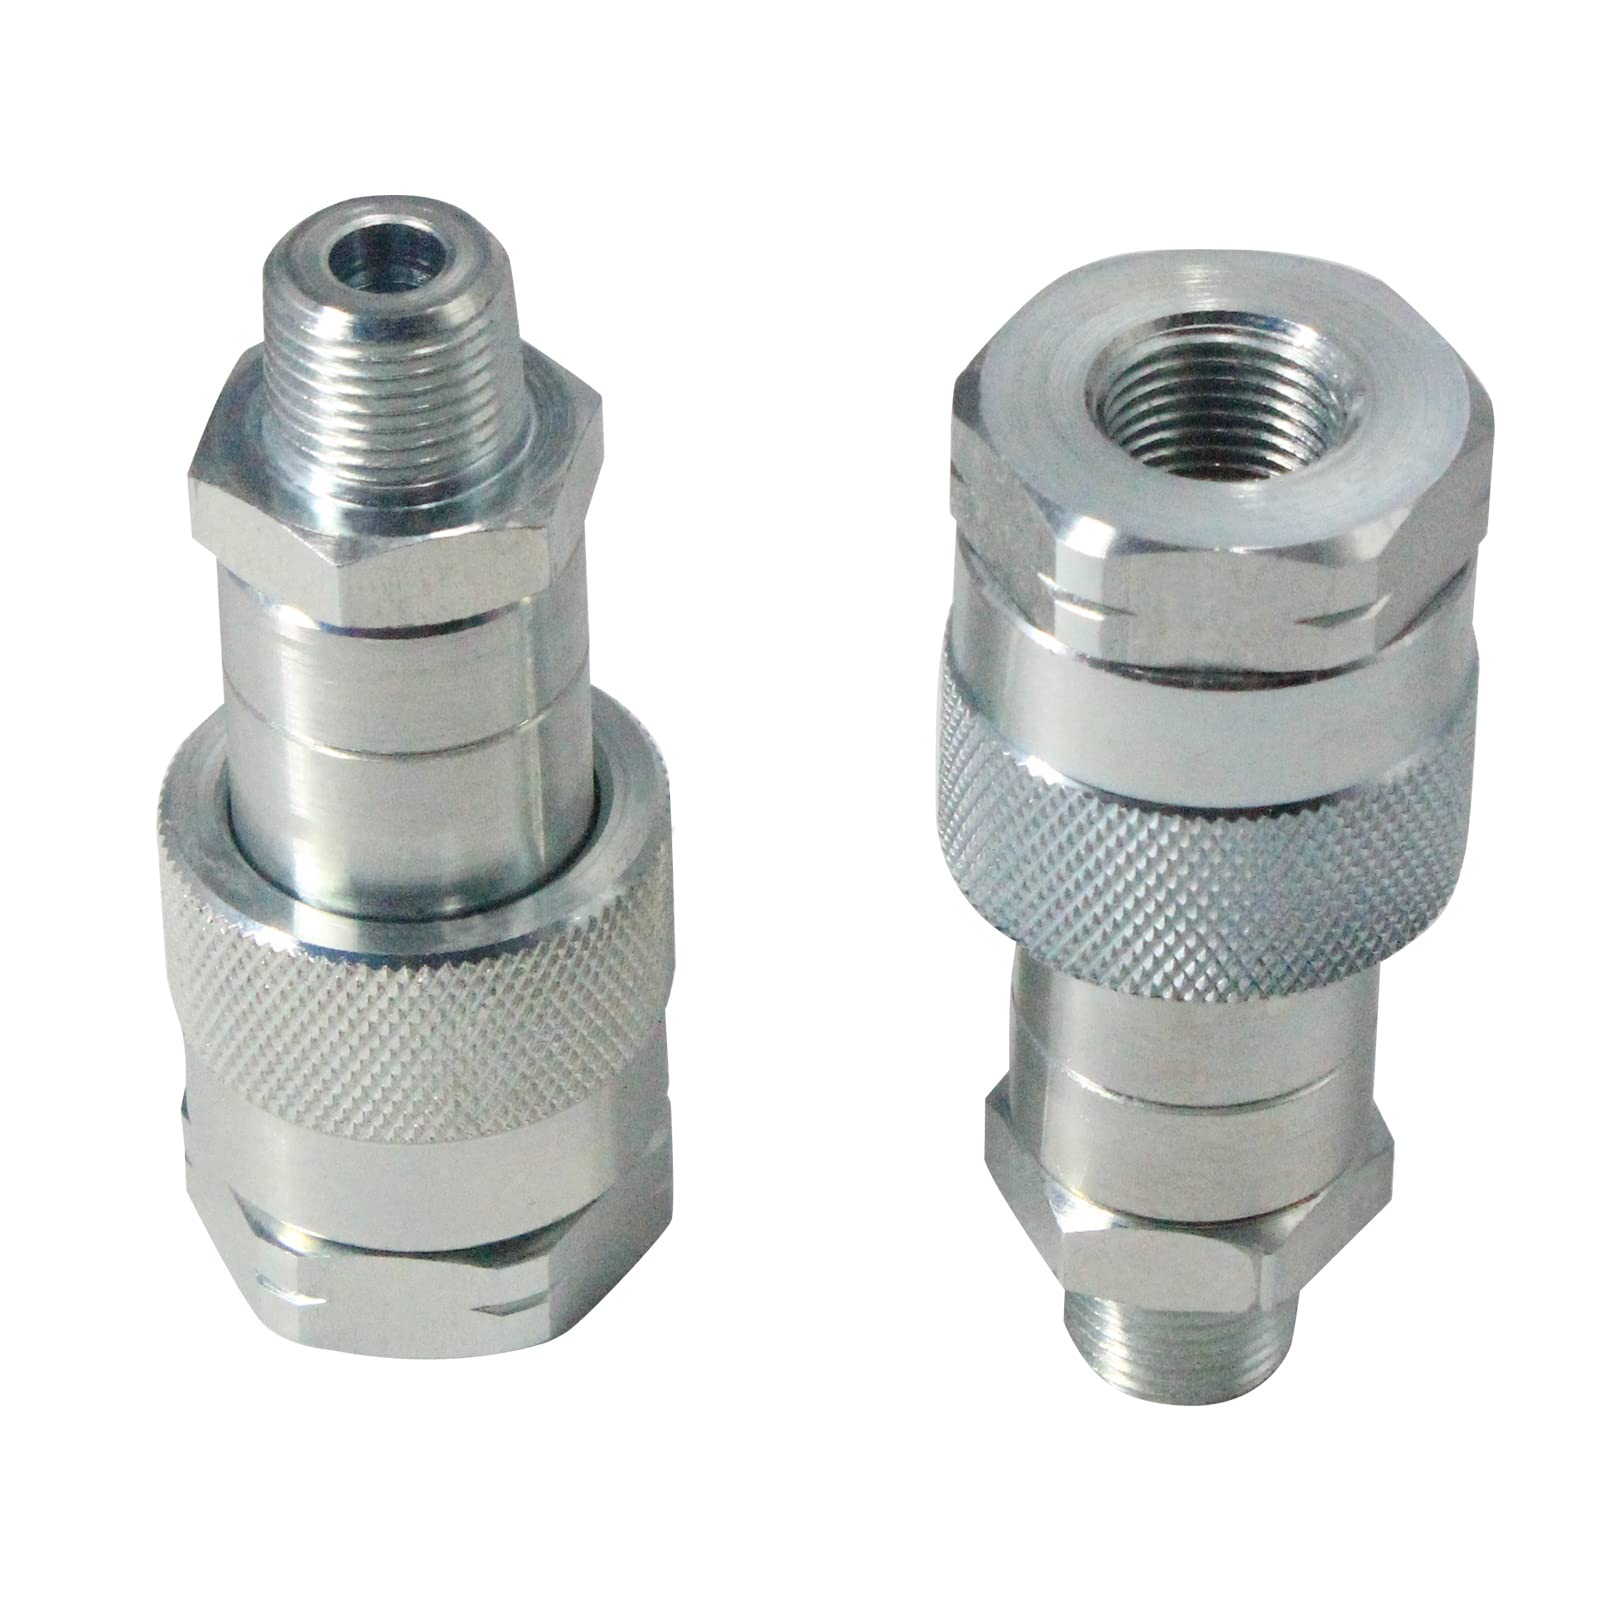 BESTOOL 3/8" 10,000 PSI High Duty Hydraulic Quick Connect Coupler Set Replaces Enerpac C-604 with 2 Dust Caps